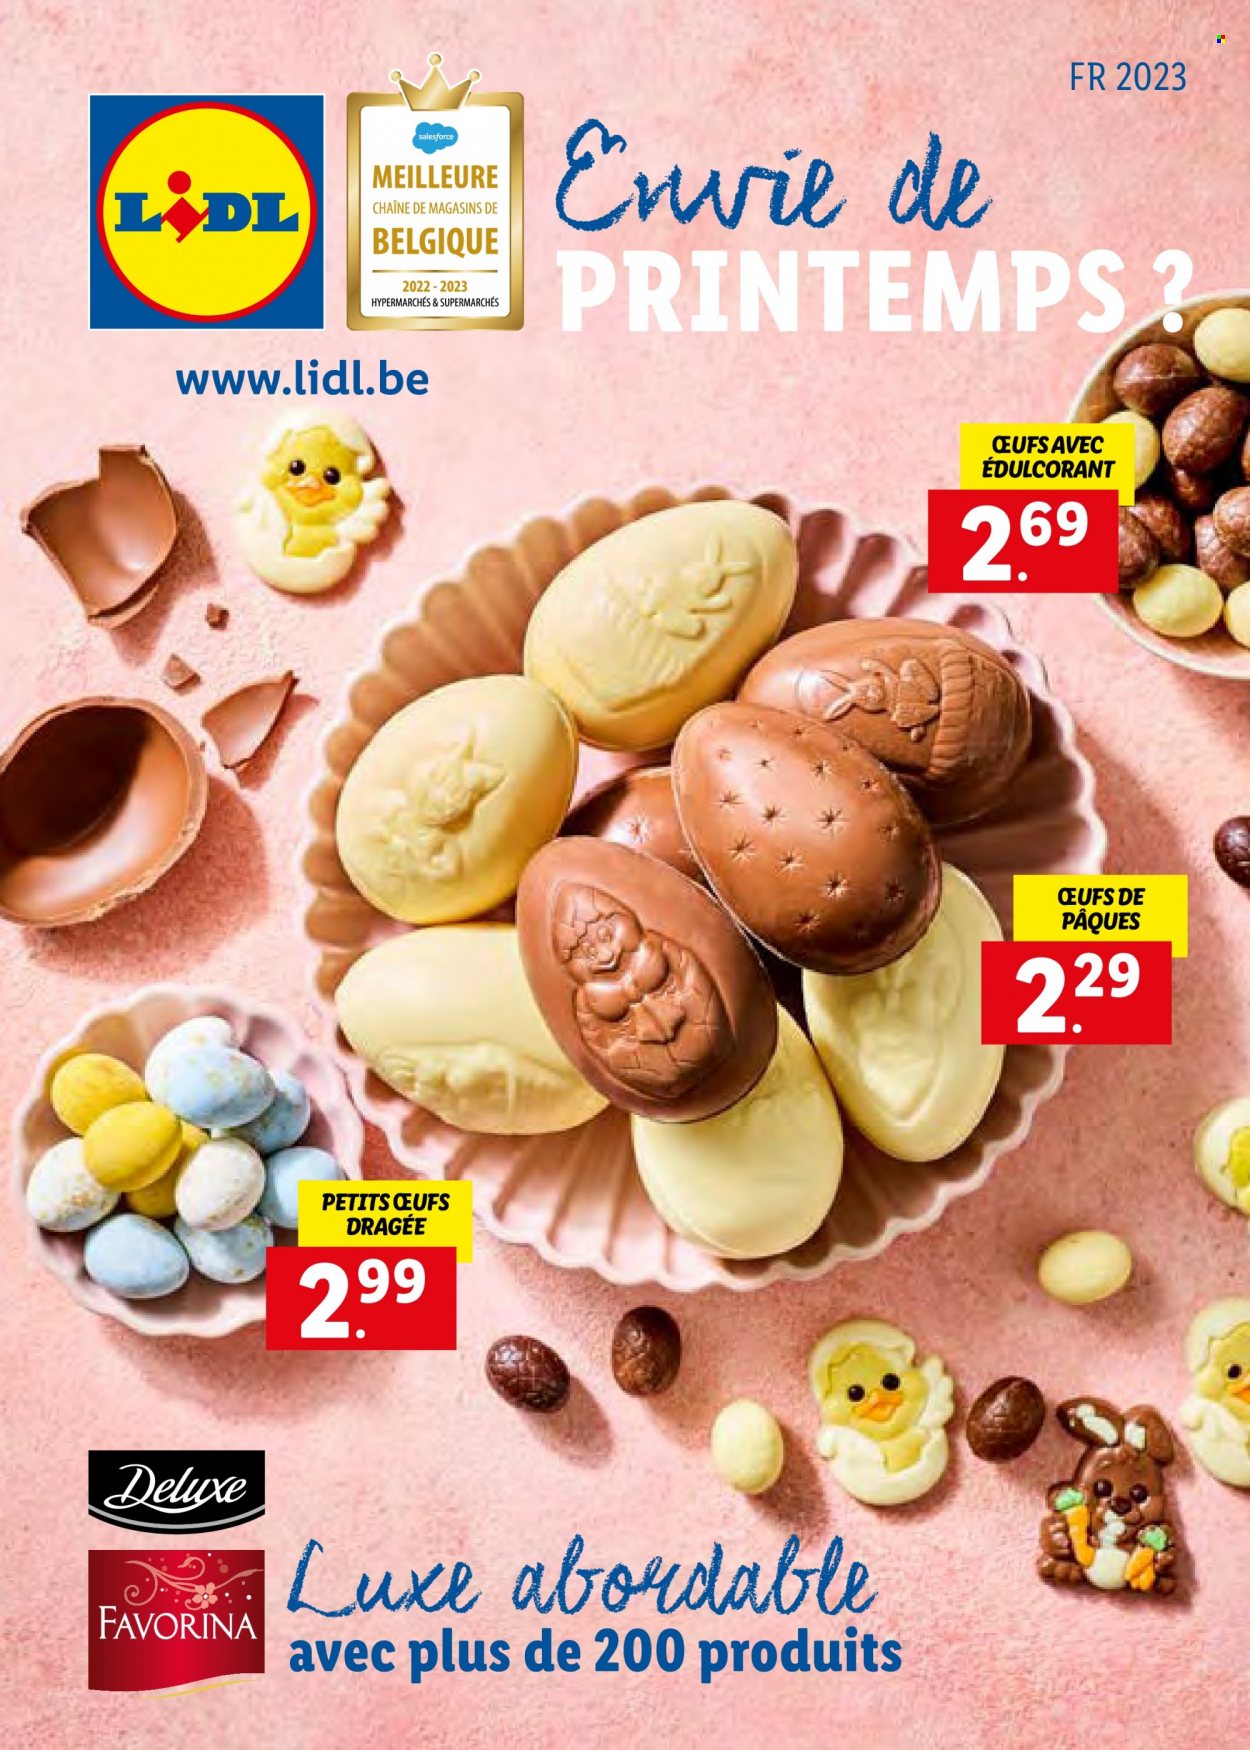 Catalogue Lidl. Page 1.